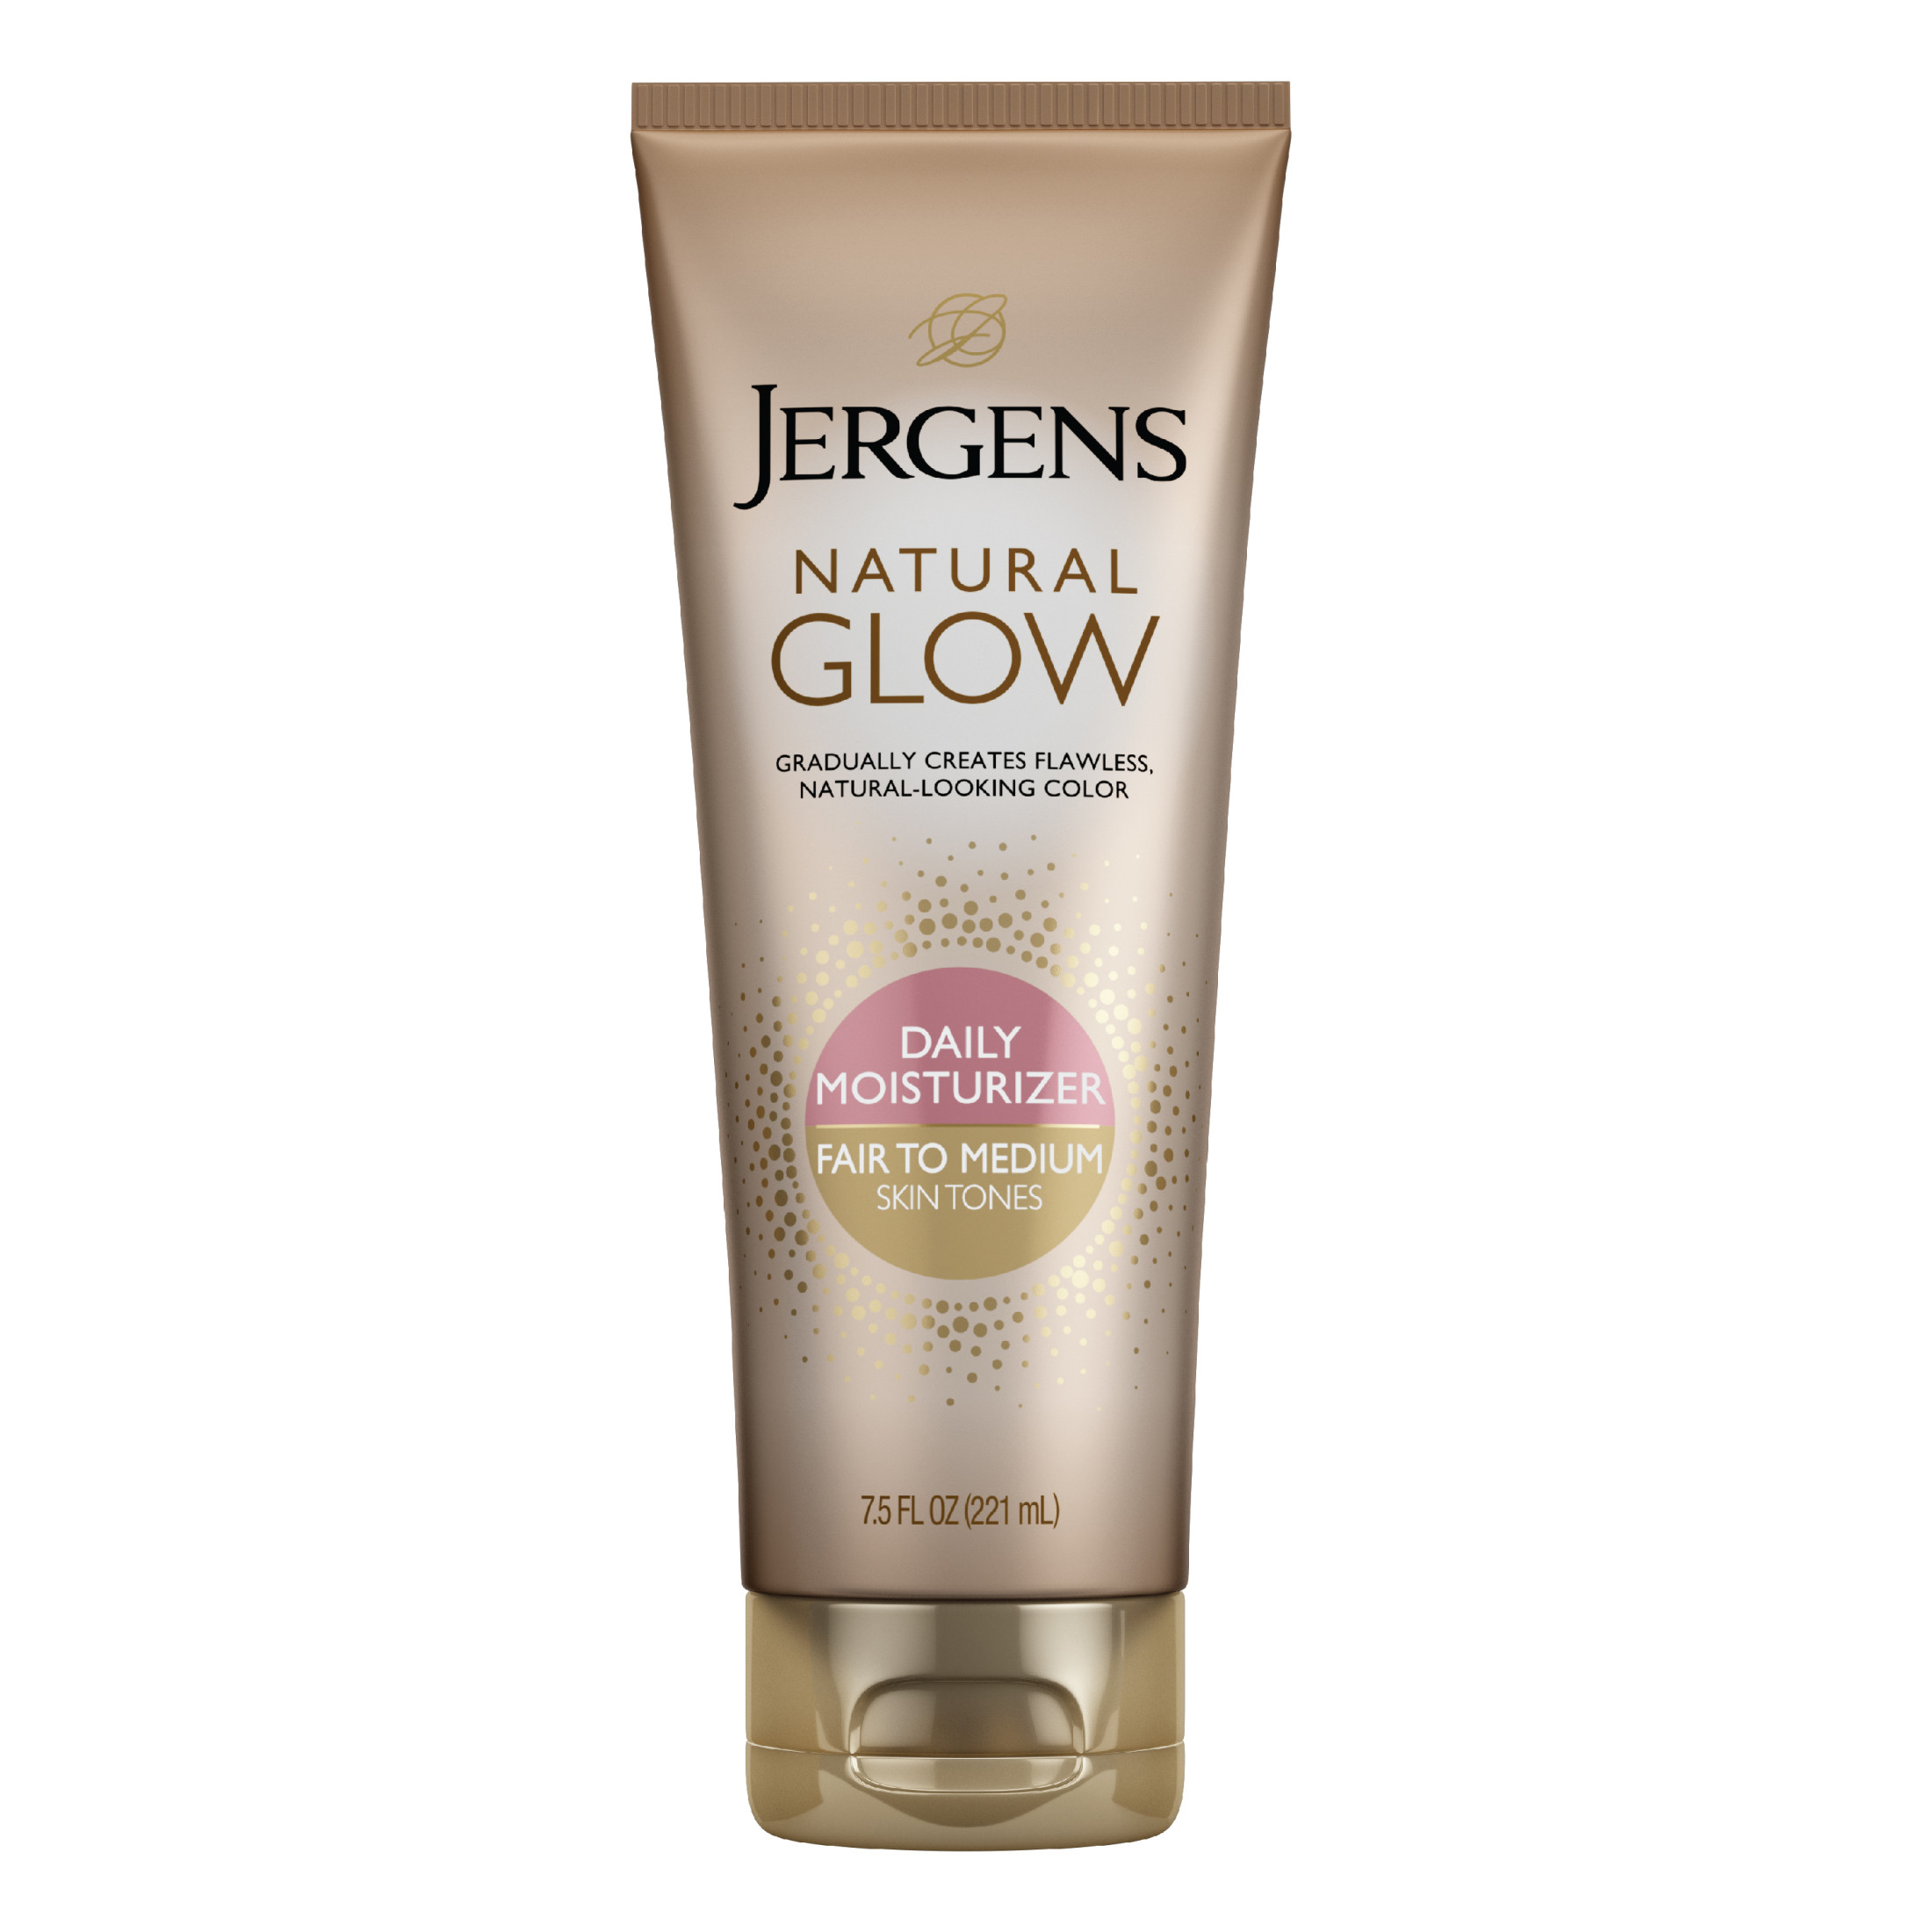 Jergens Natural Glow Self Tanner Lotion, Sunless Tanning Moisturizer for Fair to Medium Skin Tone, 7.5 fl oz - image 1 of 11